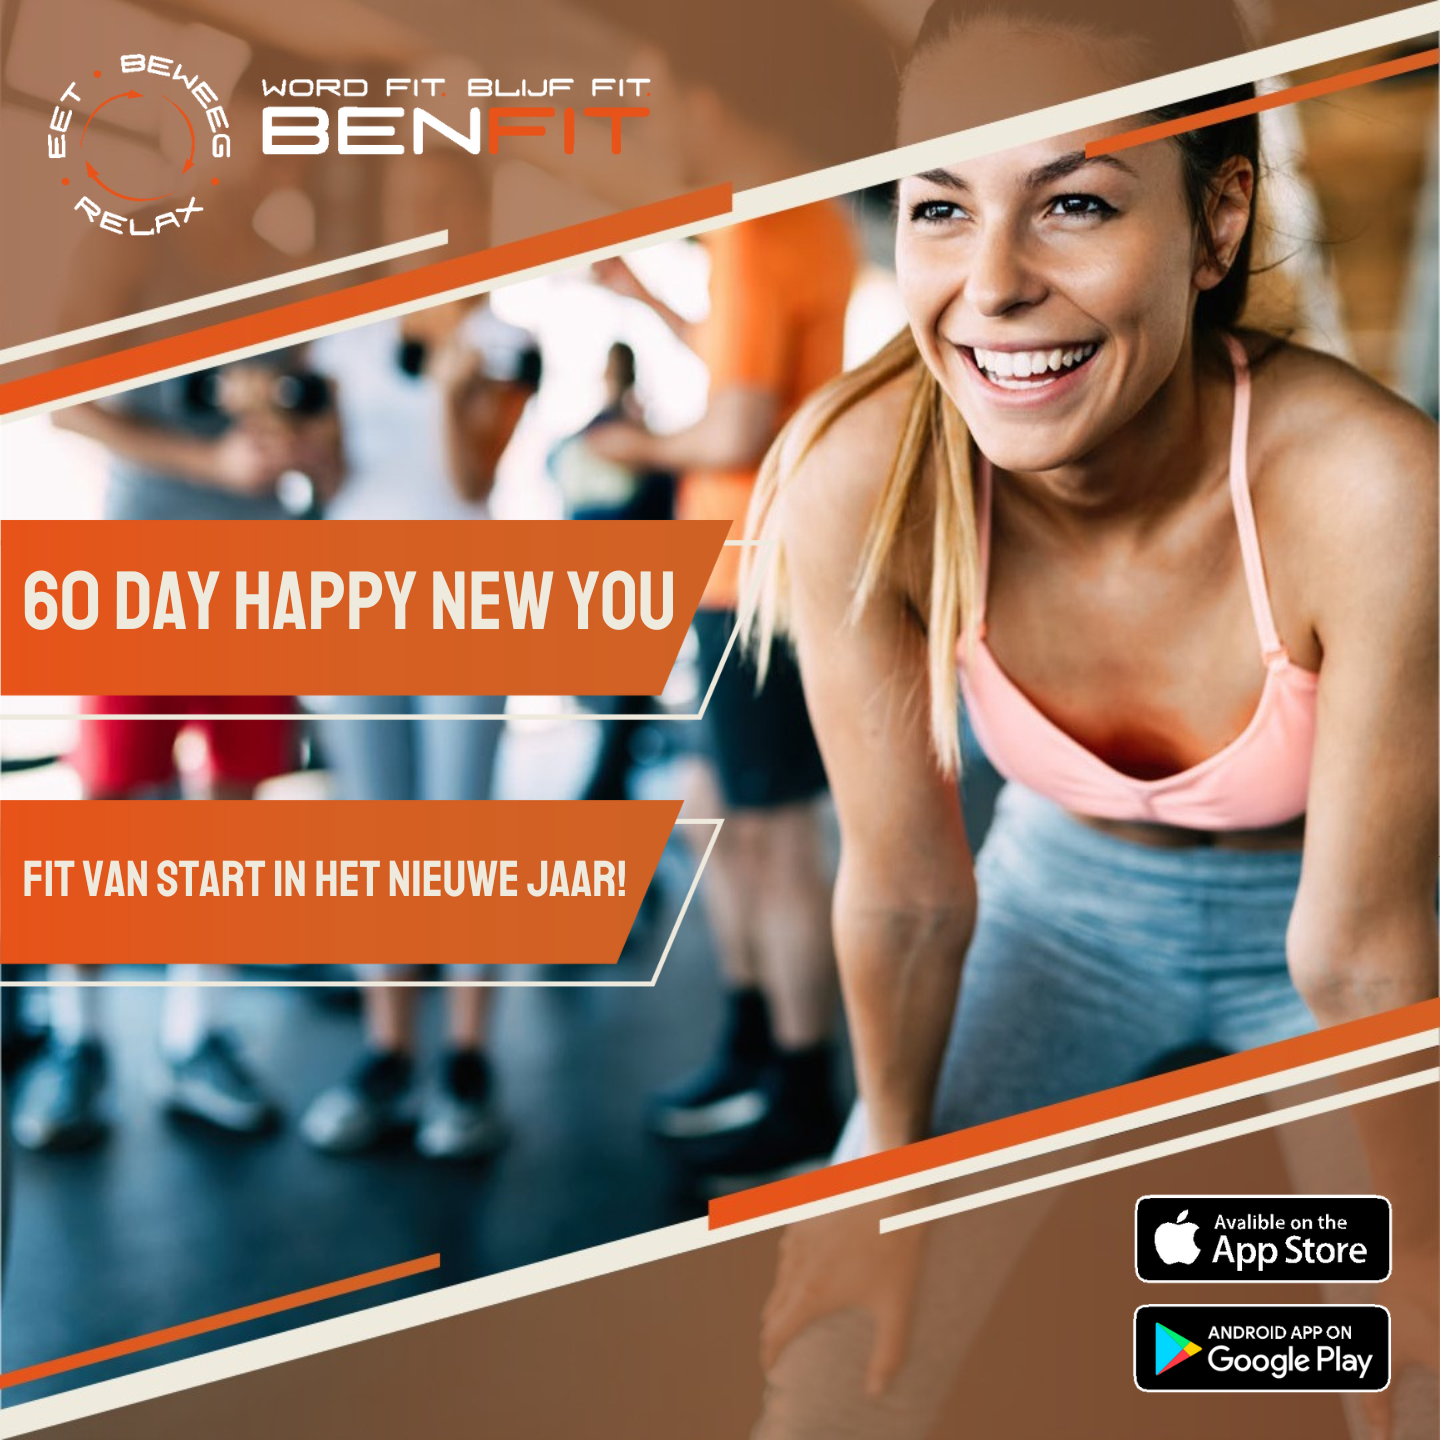 BenFit 60 day happy new you